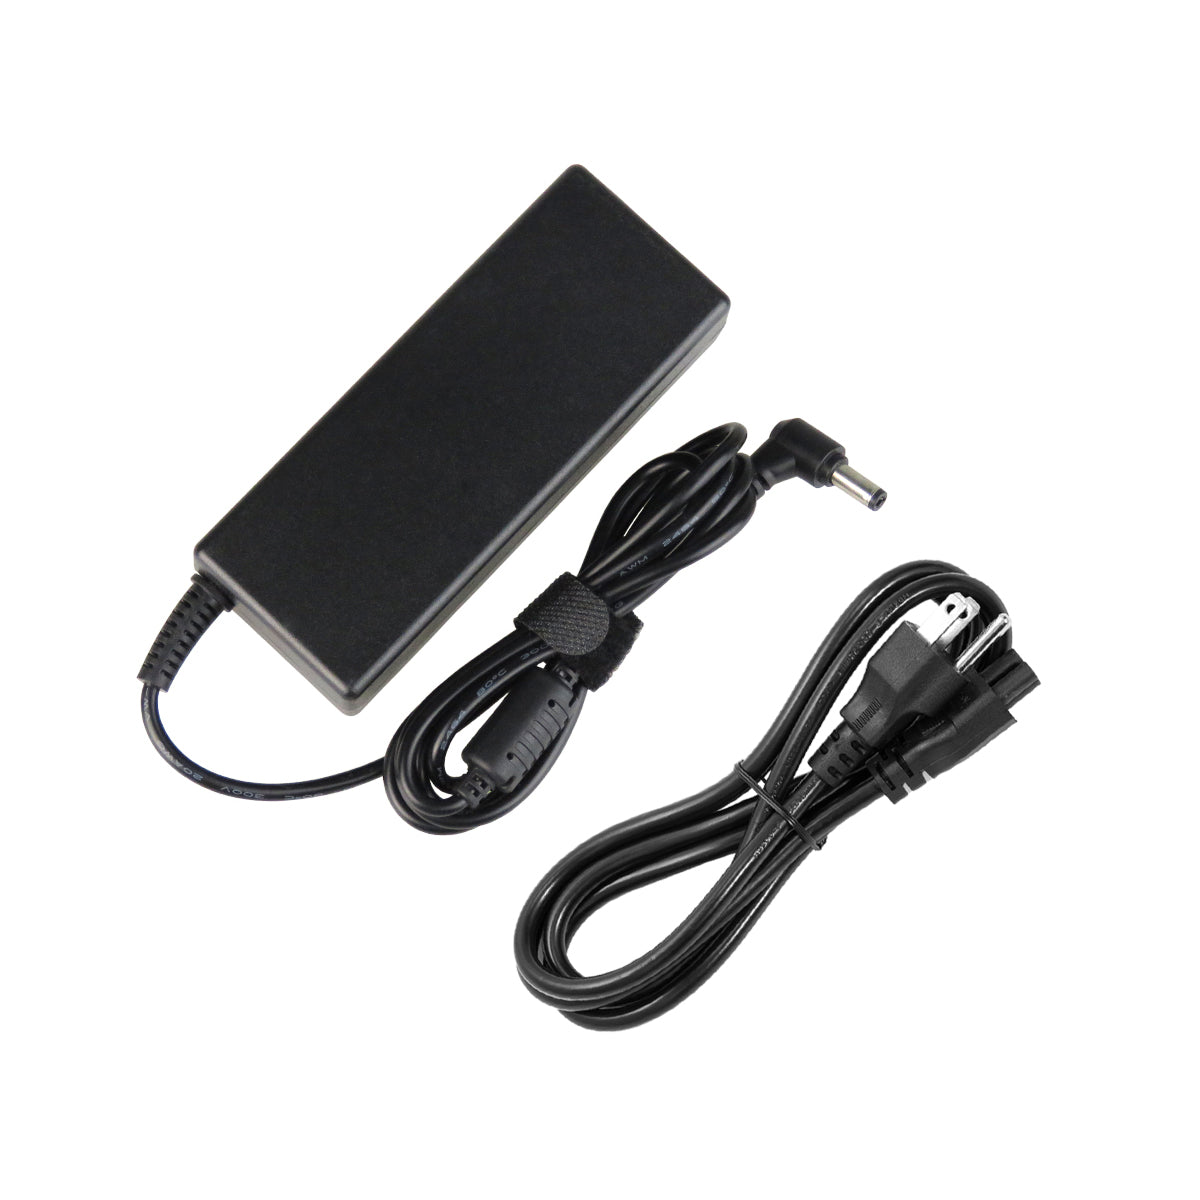 AC Adapter Charger for ASUS X54H-SX145D Notebook.